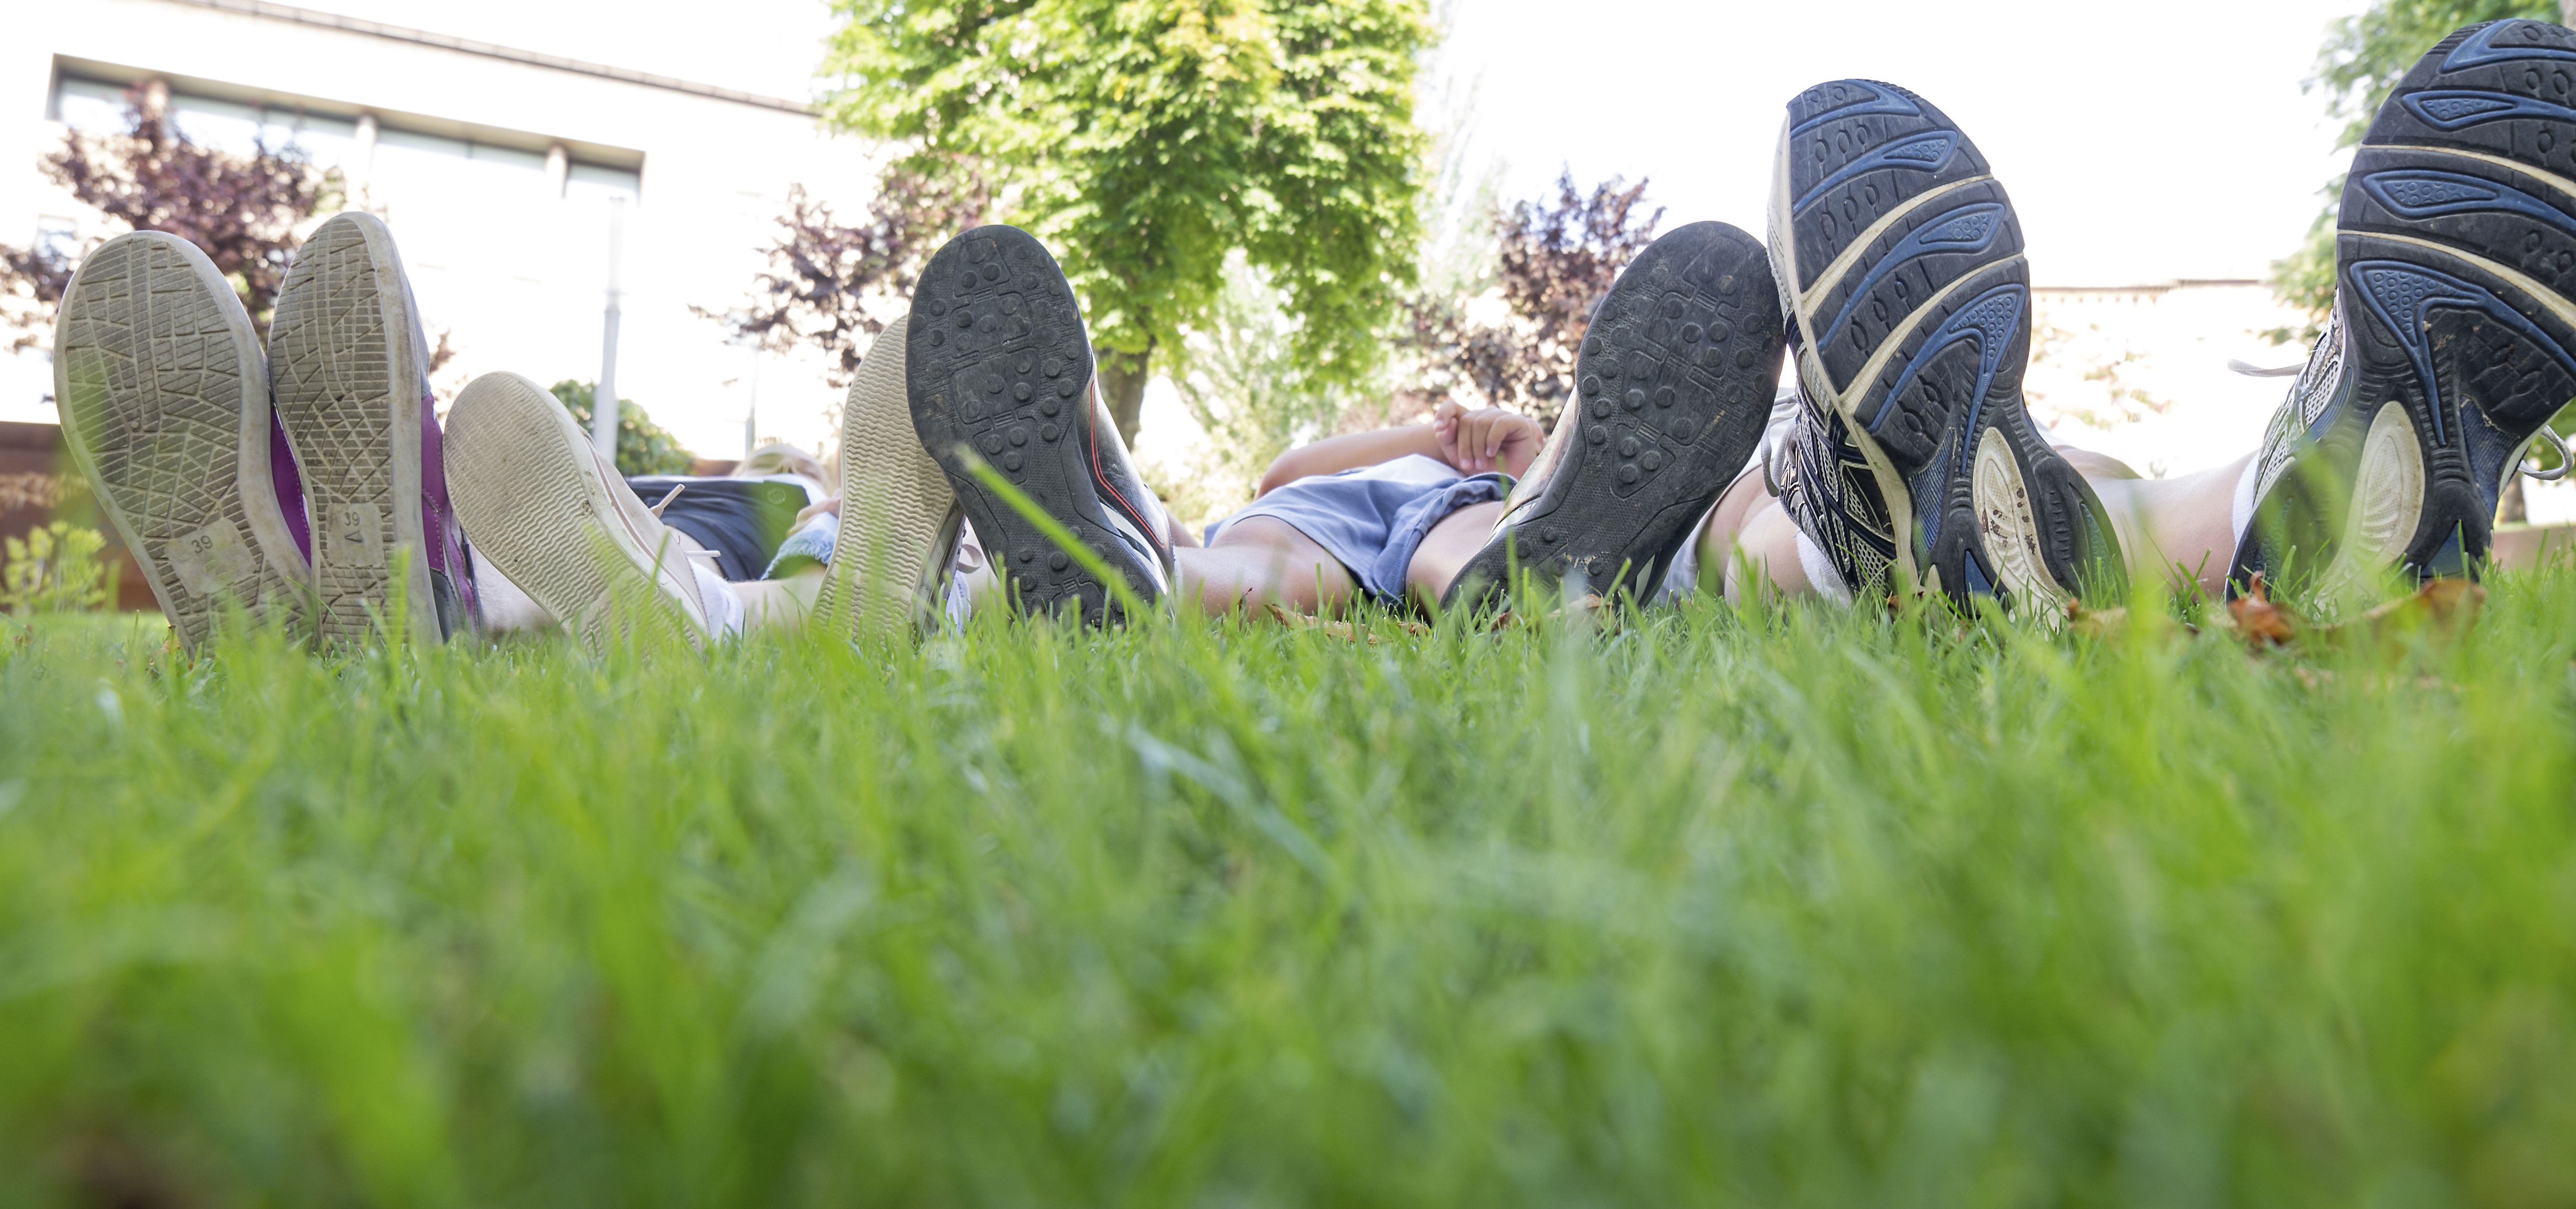 Row of sneakers on feet laying in green grass.